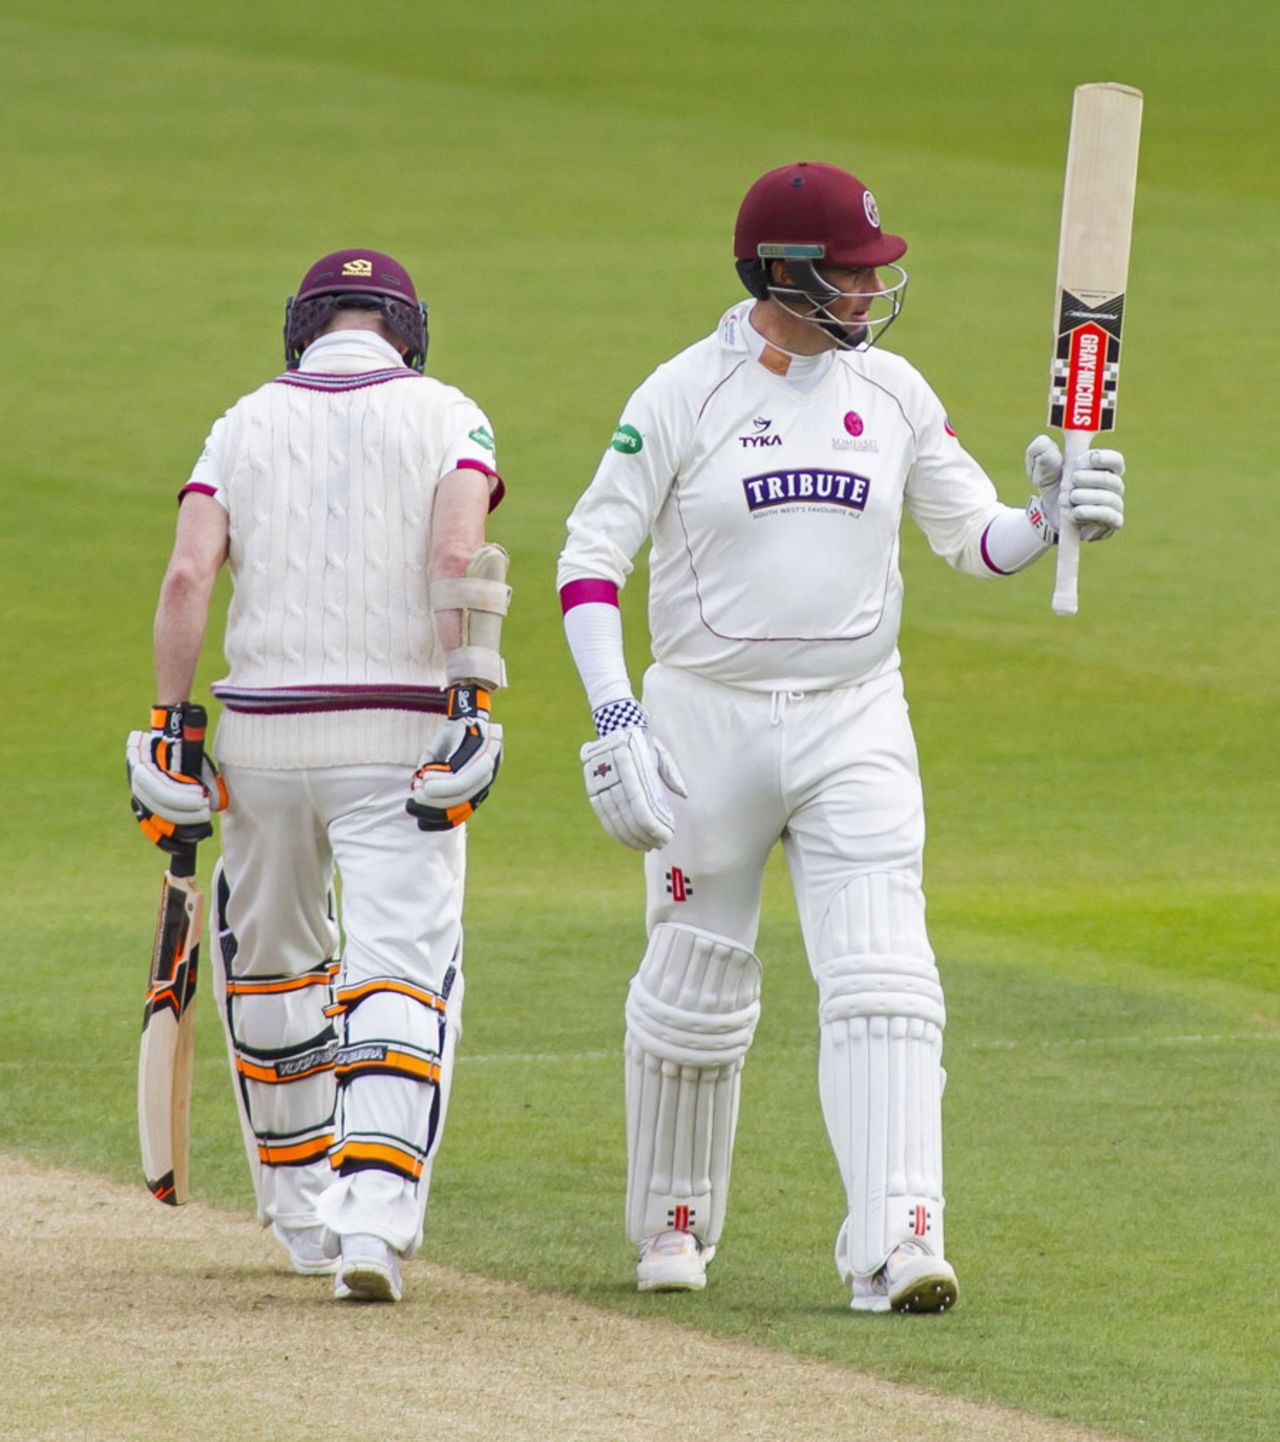 Marcus Trescothick notched a half-century, Surrey v Somerset, Specsavers County Championship, Division One, The Oval, 2nd day, April 25, 2016